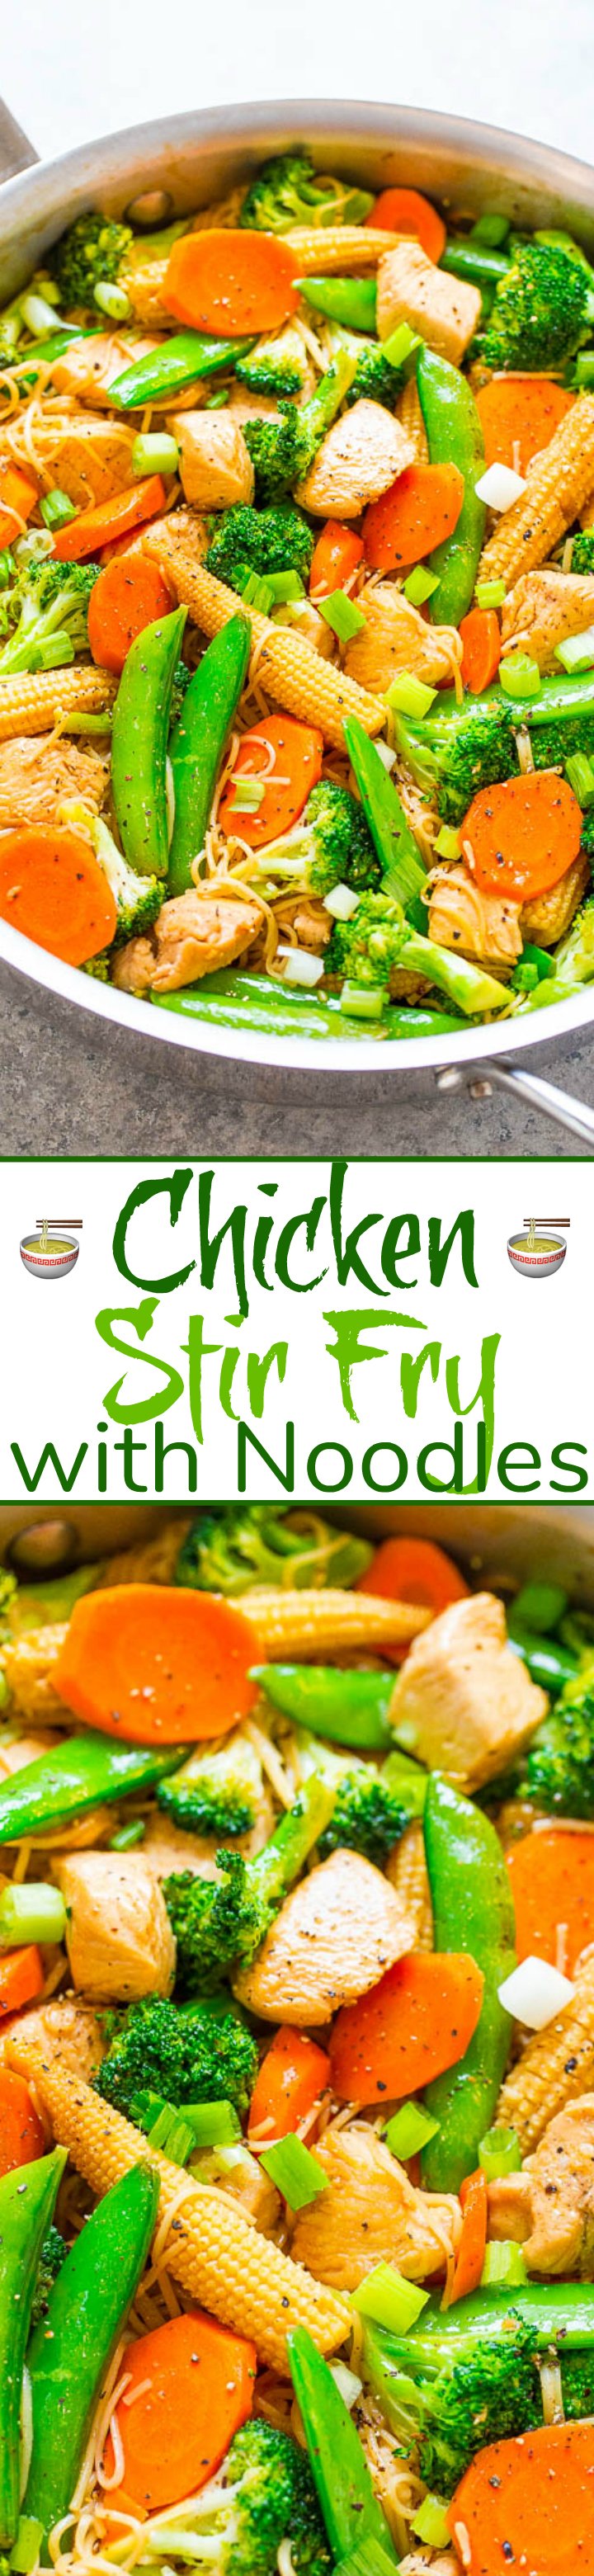 Chicken Stir Fry with Noodles - Skip takeout and make this EASY stir fry that's ready in 15 minutes!! Loaded with juicy chicken, crisp-tender veggies, comforting noodles, and Asian-inspired flavors! Perfect for busy weeknights!! 